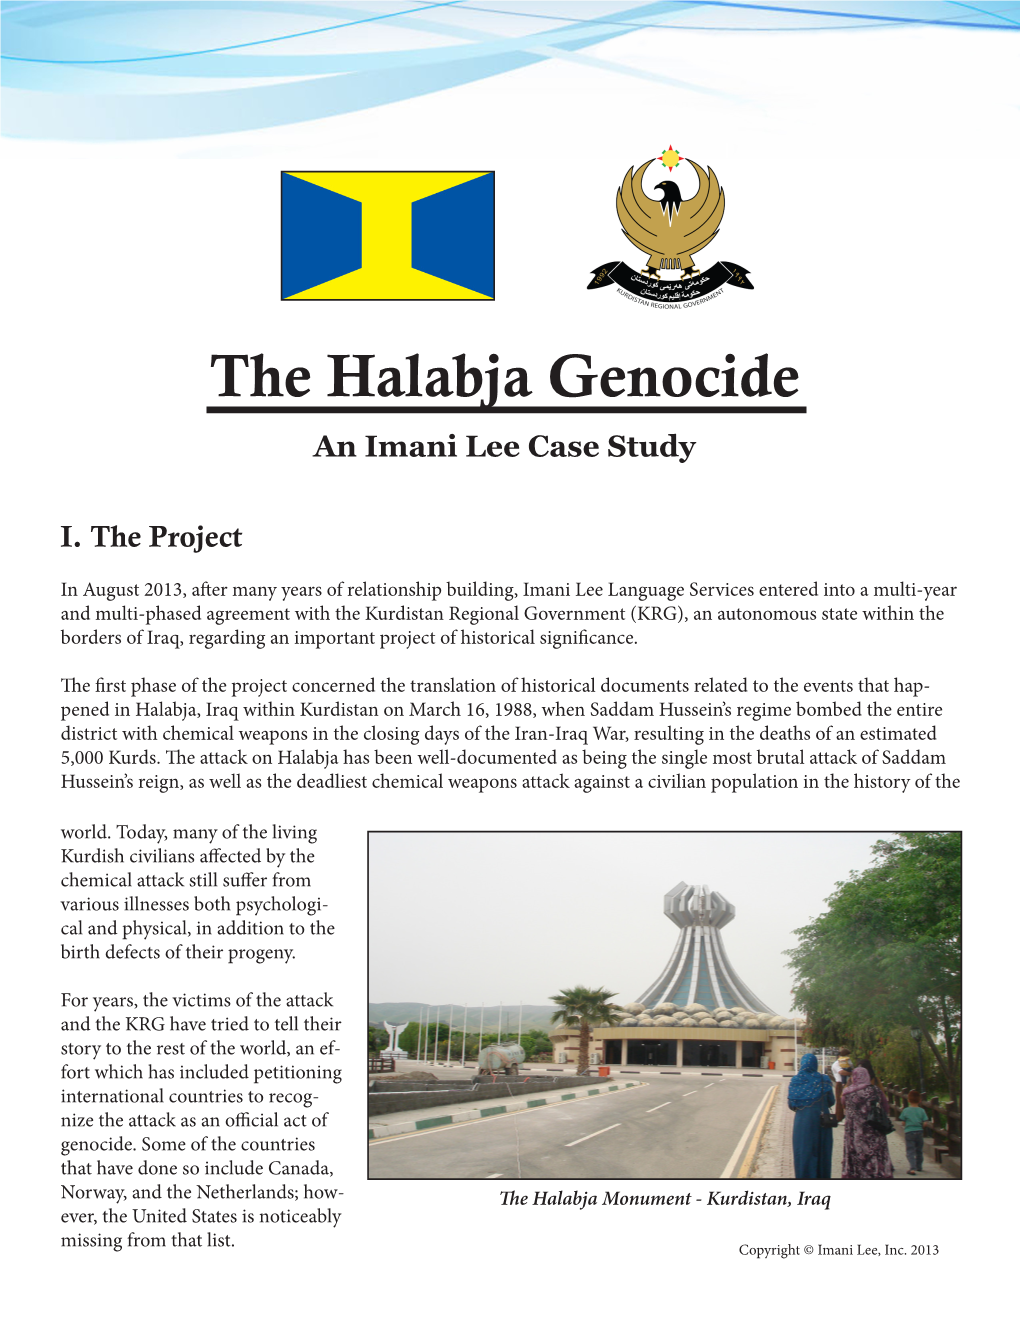 The Halabja Genocide an Imani Lee Case Study